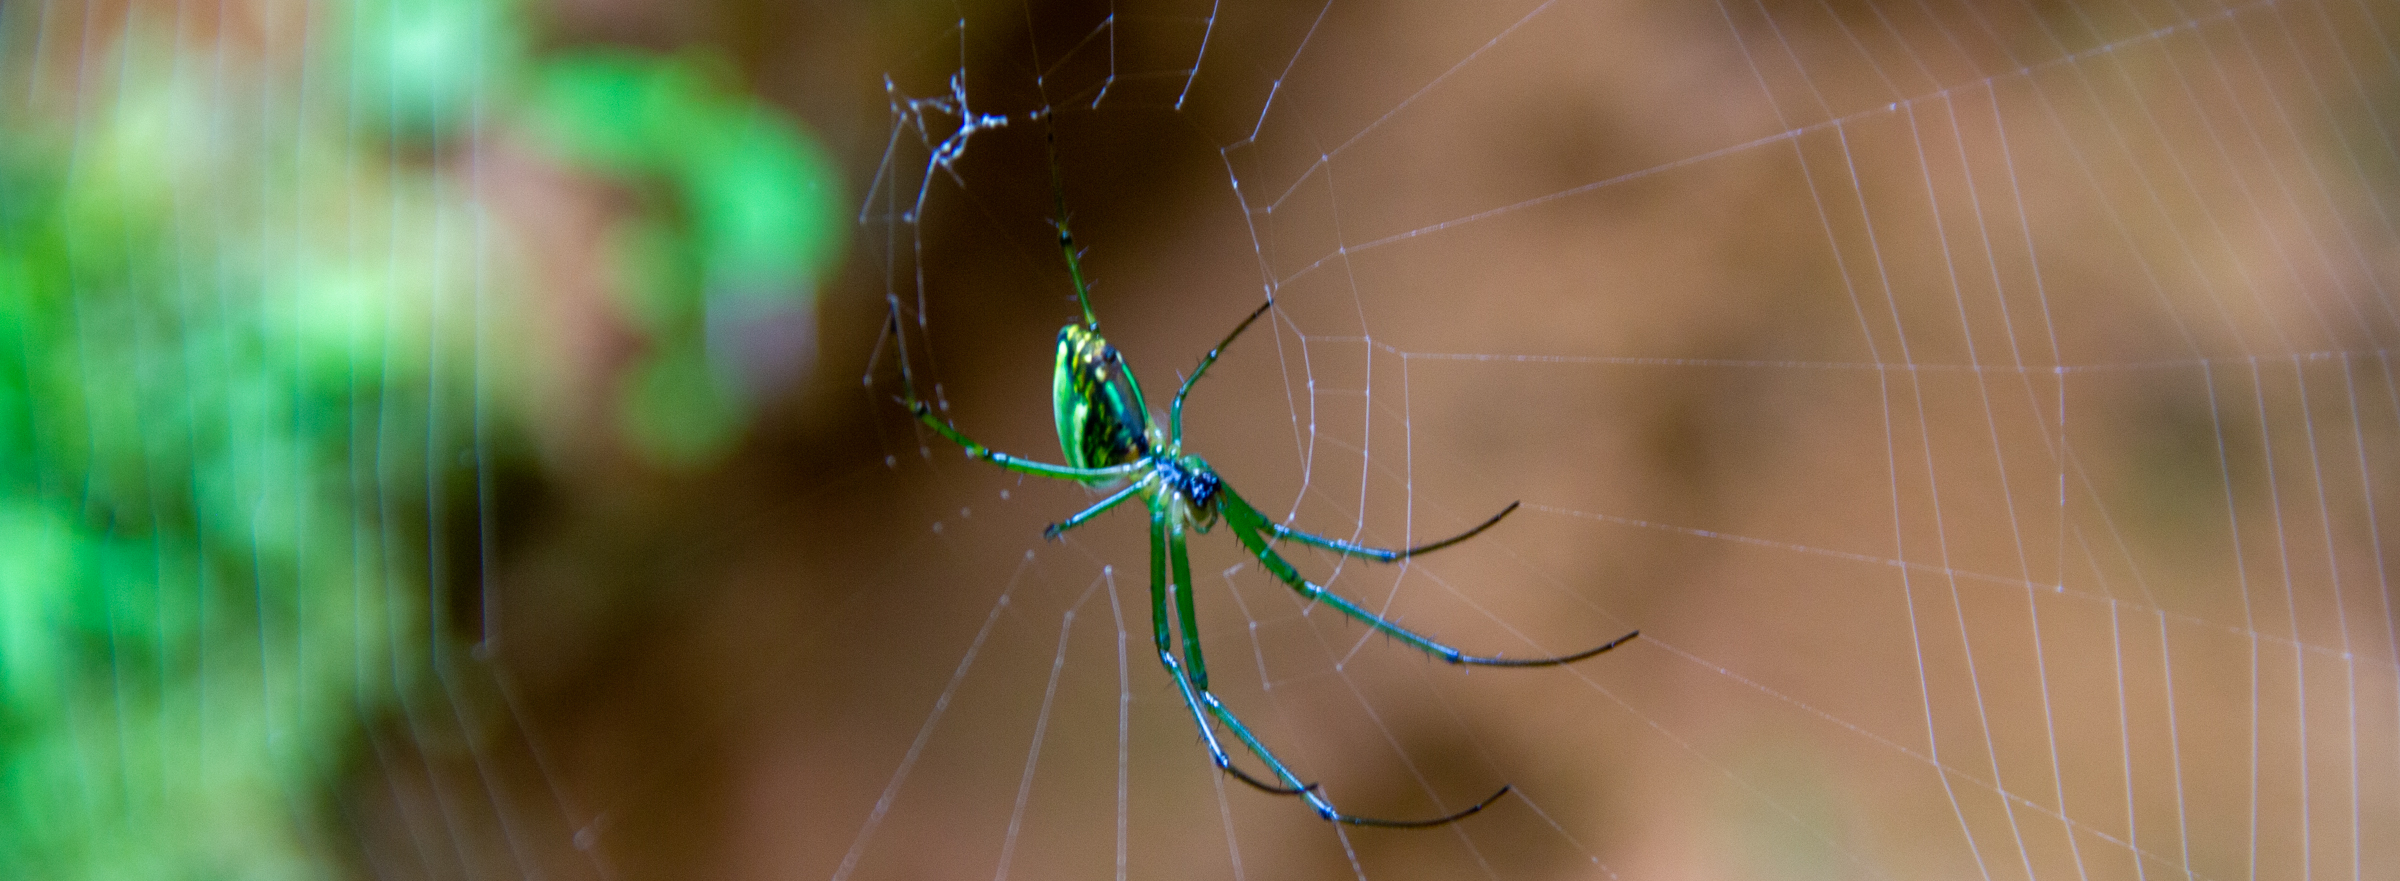 green spider in web